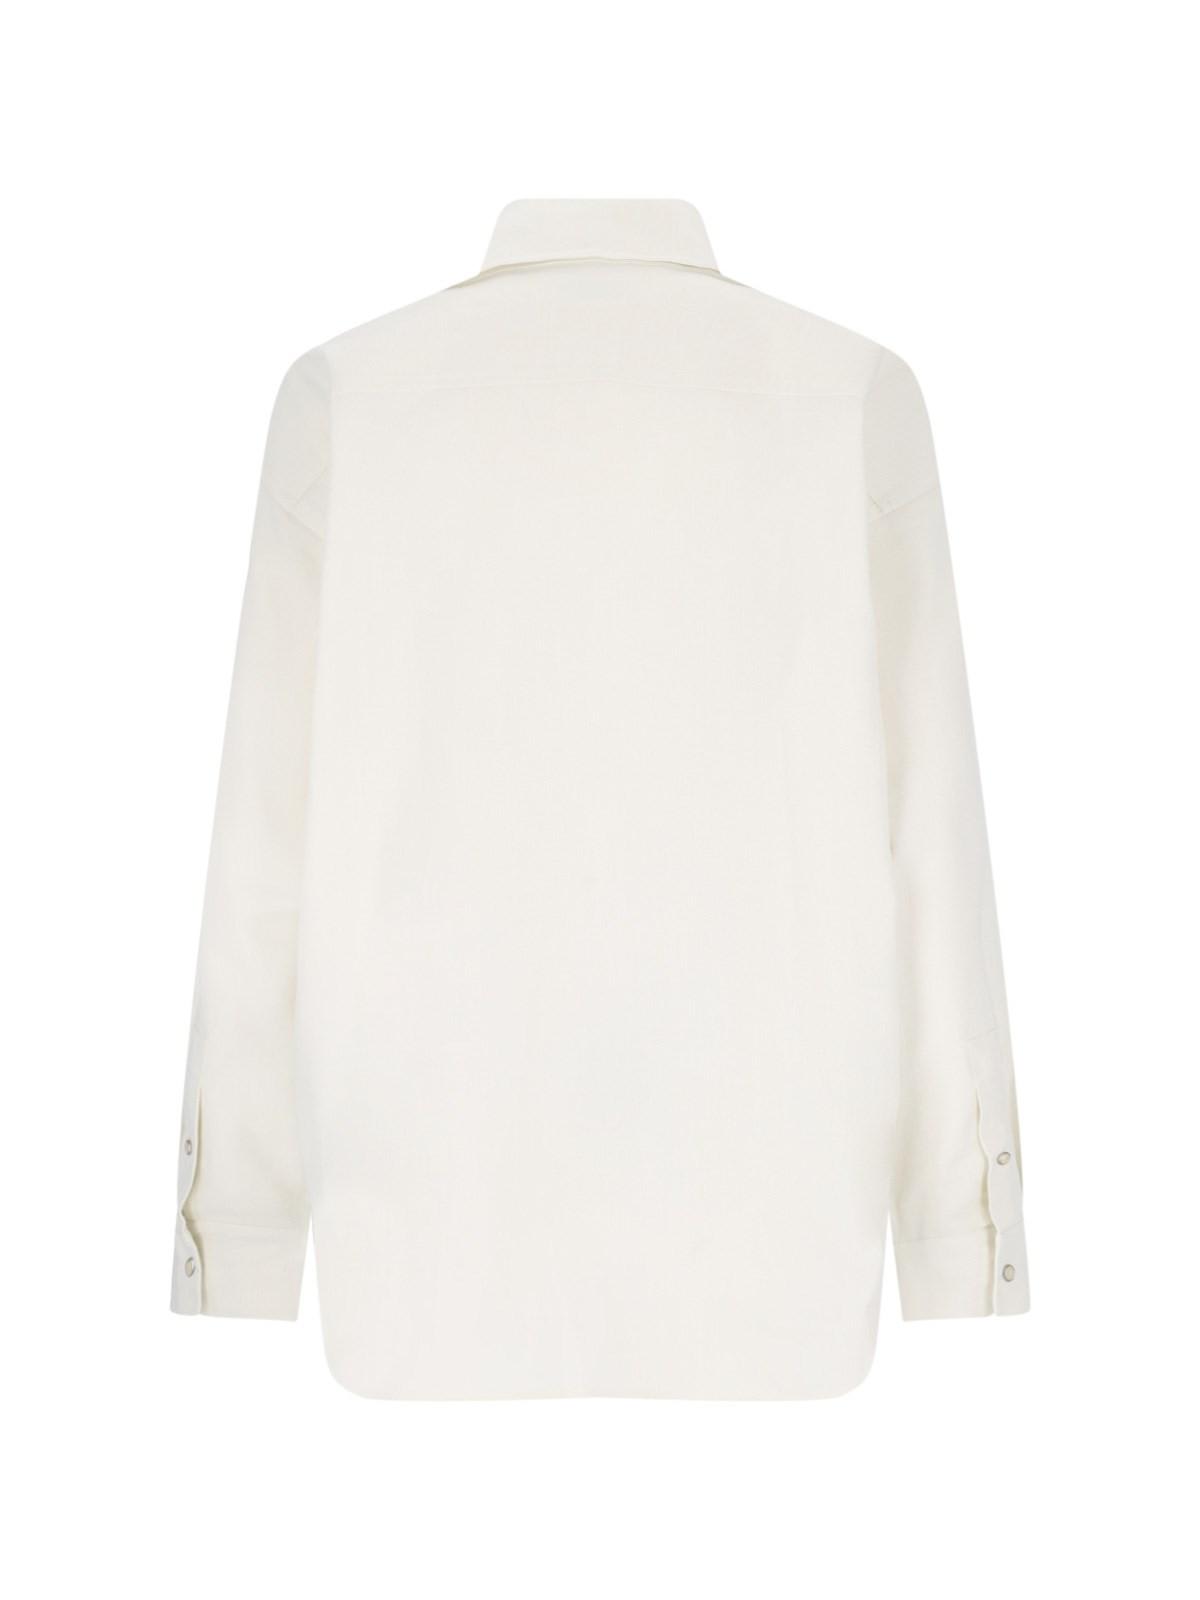 Lemaire Classic Shirt In Wh001 Chalk